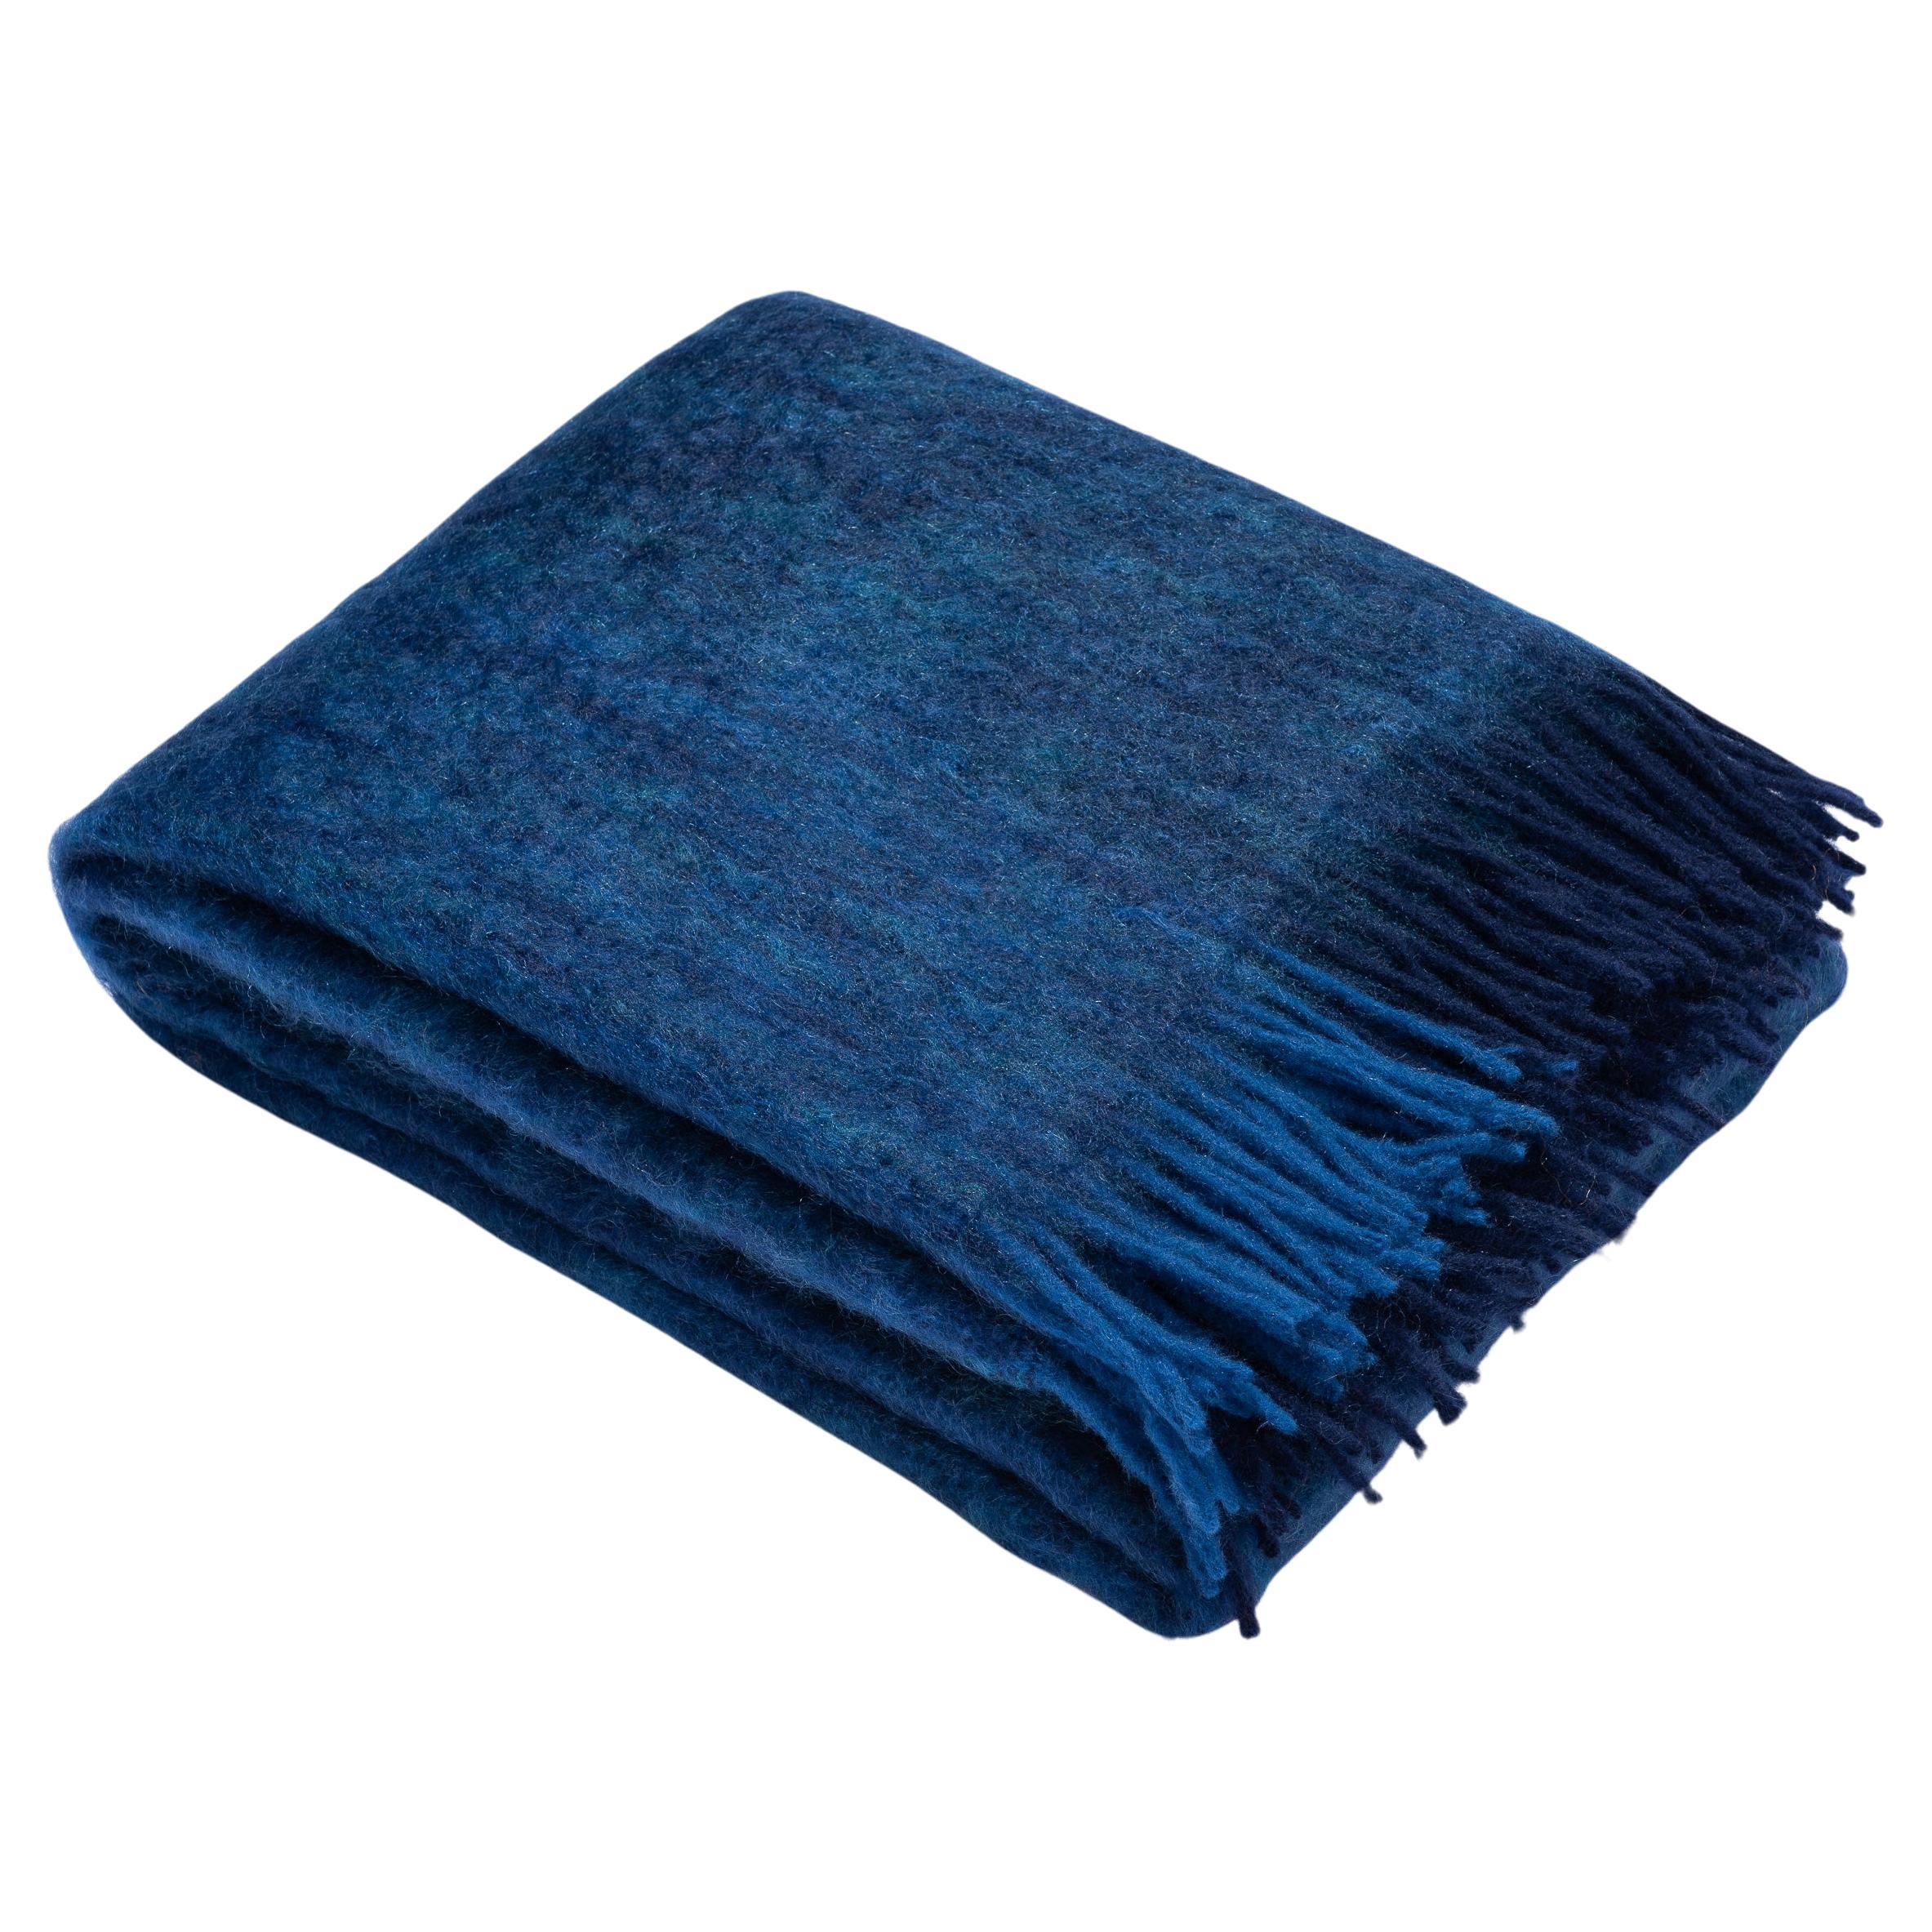 Mohair Blanket Blue Woven of Mohair and Wool by Catharina Mende